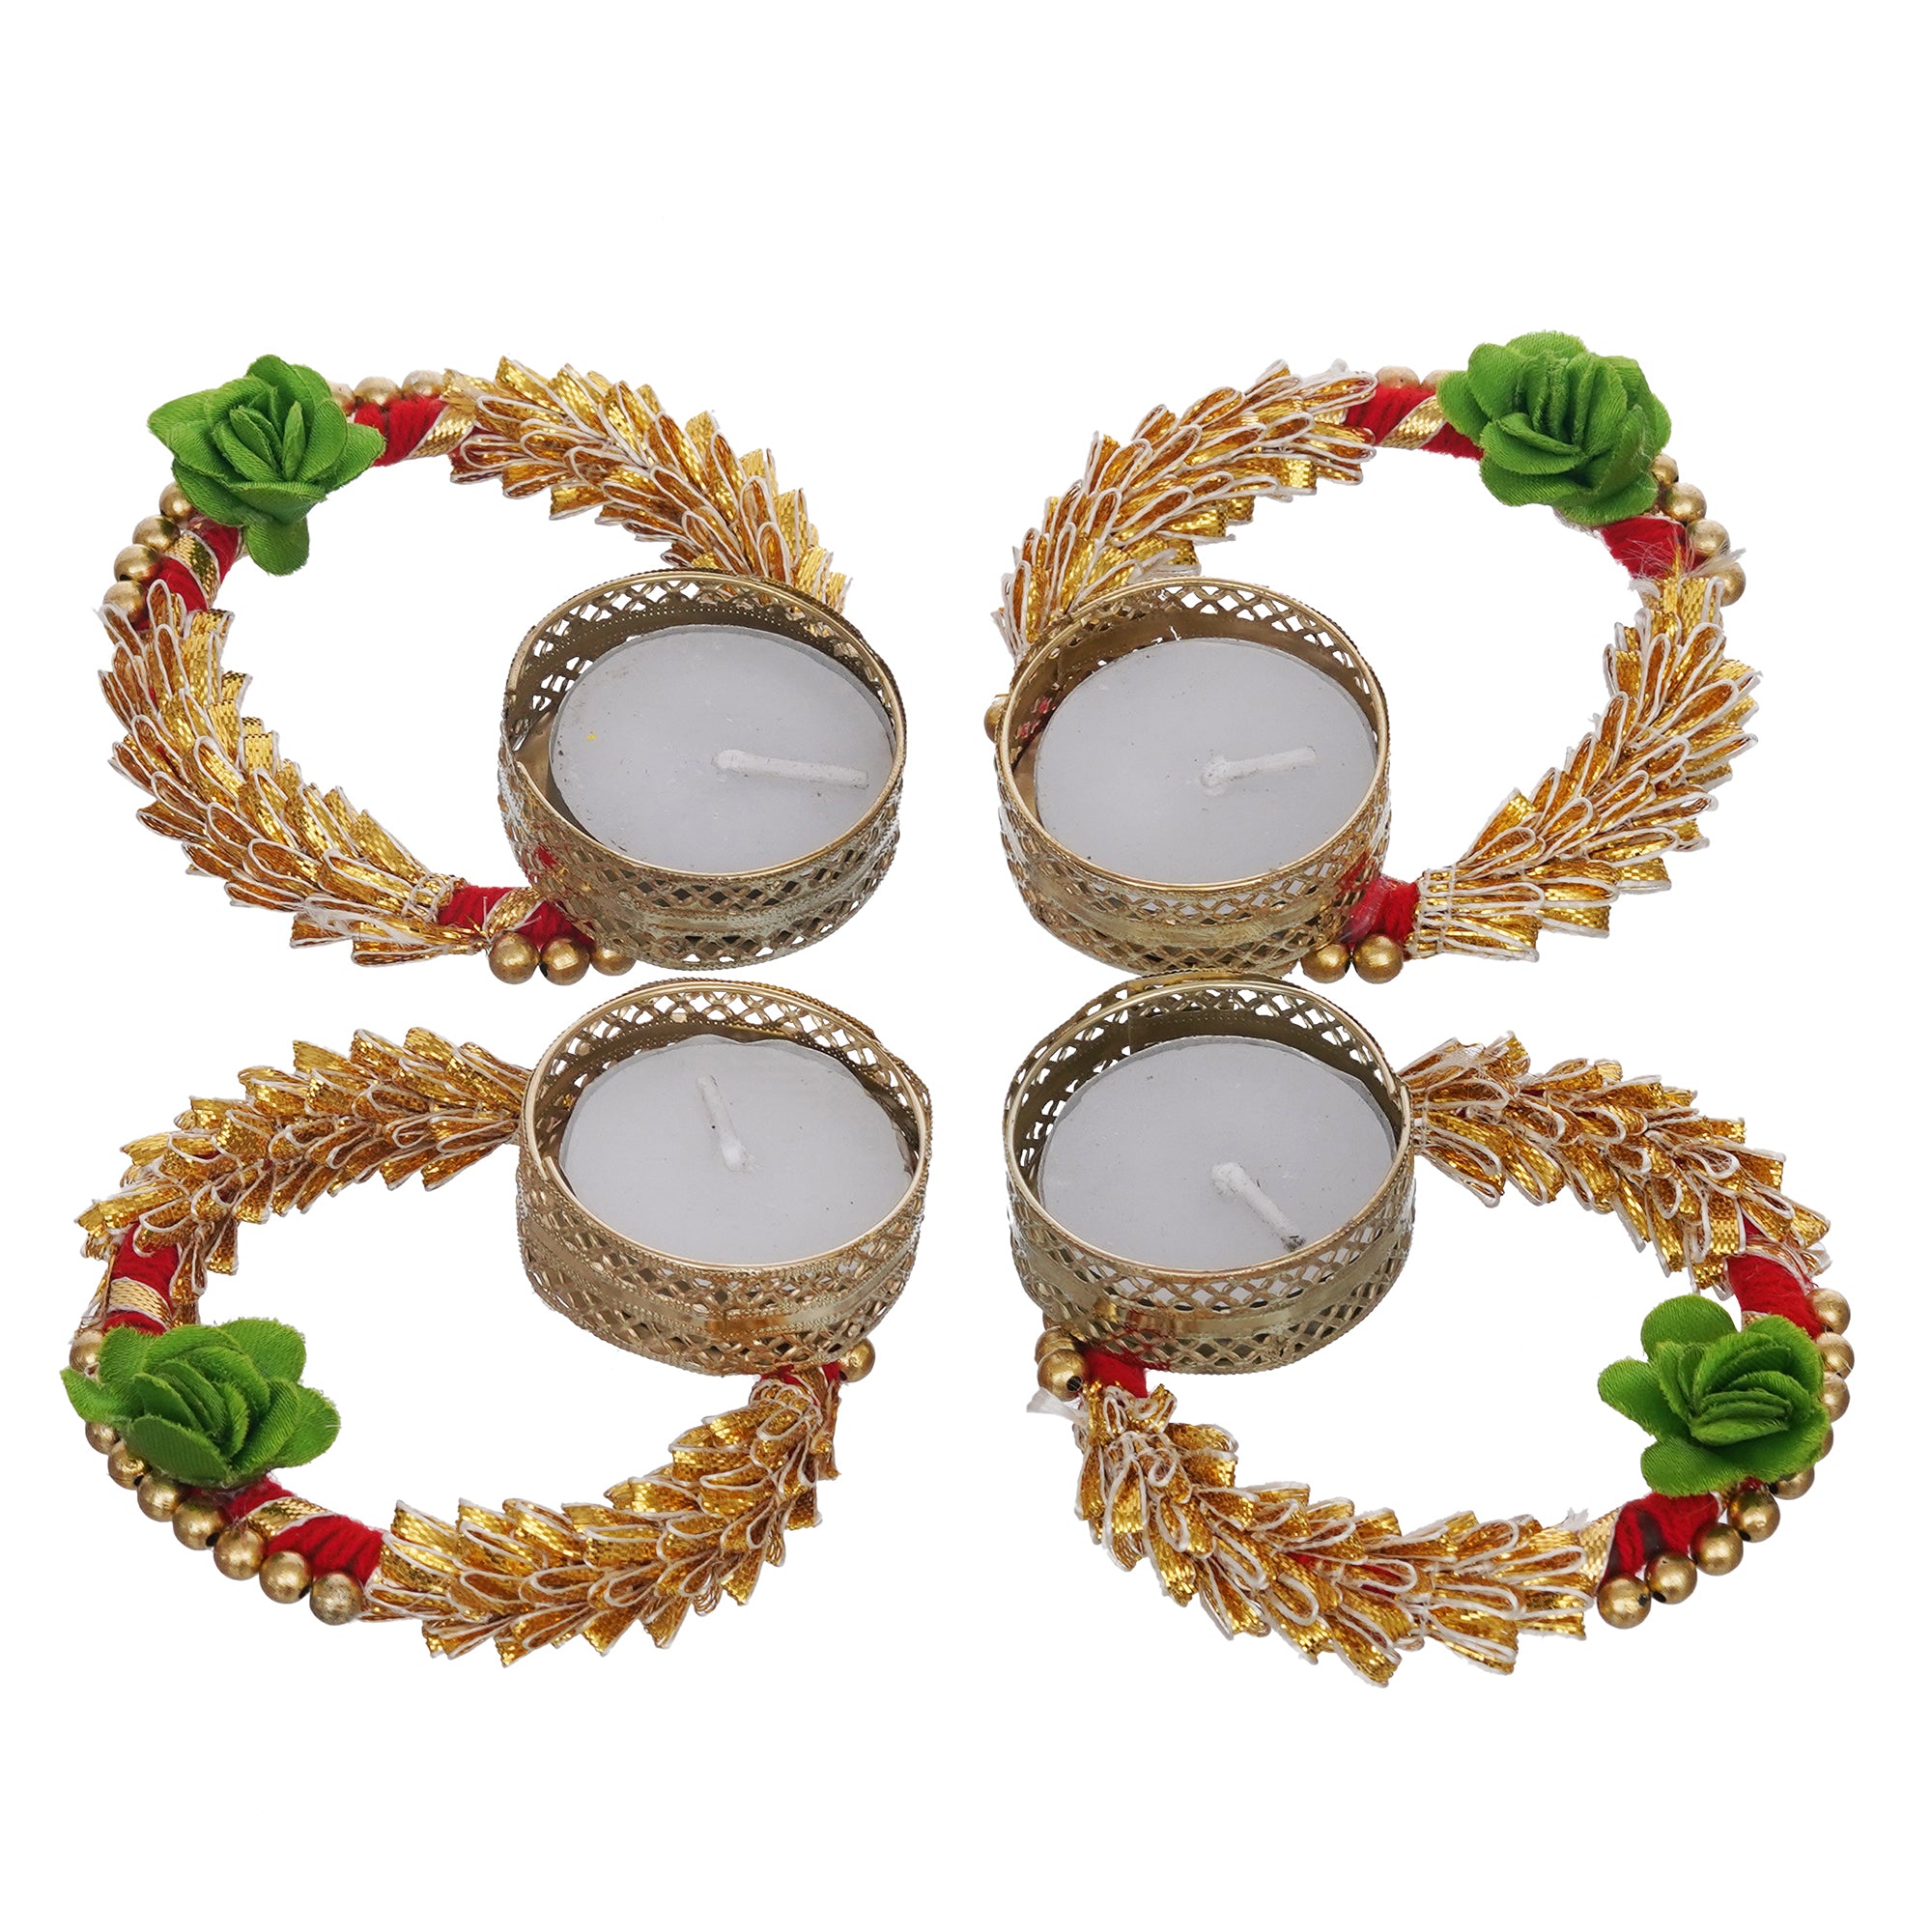 eCraftIndia Set of 4 Green and Golden Round Shaped Floral Decorative Tea Light Candle Holders 2